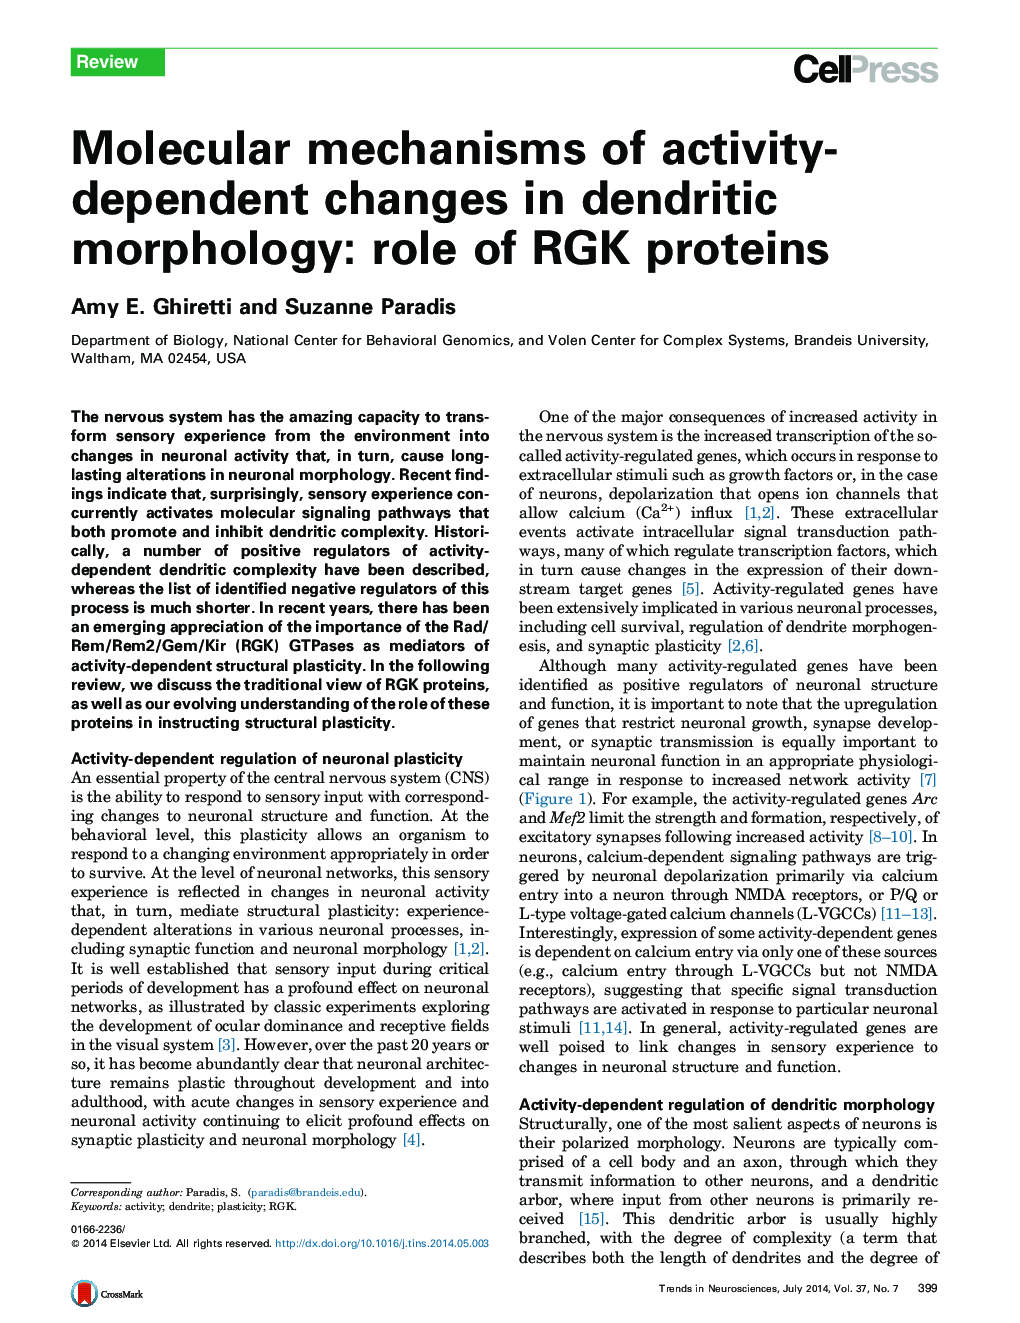 Molecular mechanisms of activity-dependent changes in dendritic morphology: role of RGK proteins